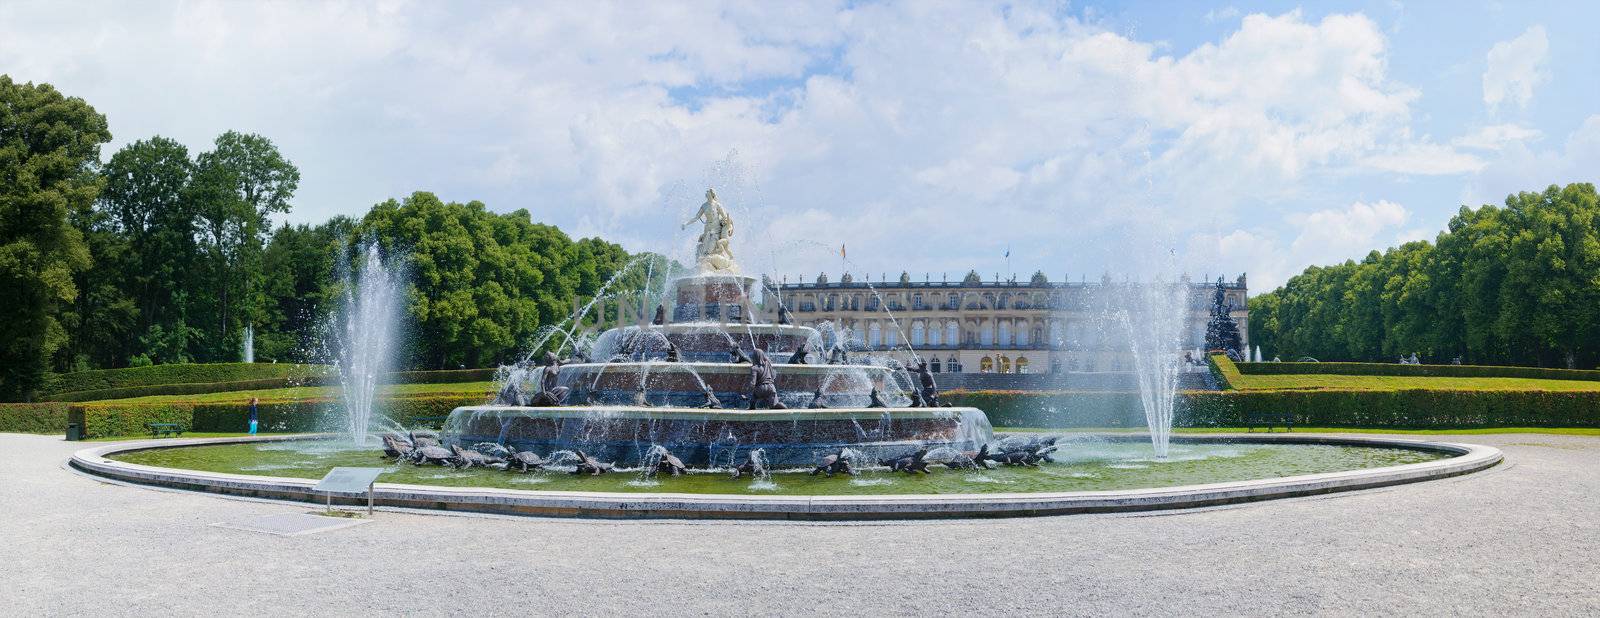 Fountain of King Ludwigs palace Herrenchiemsee by maxoliki